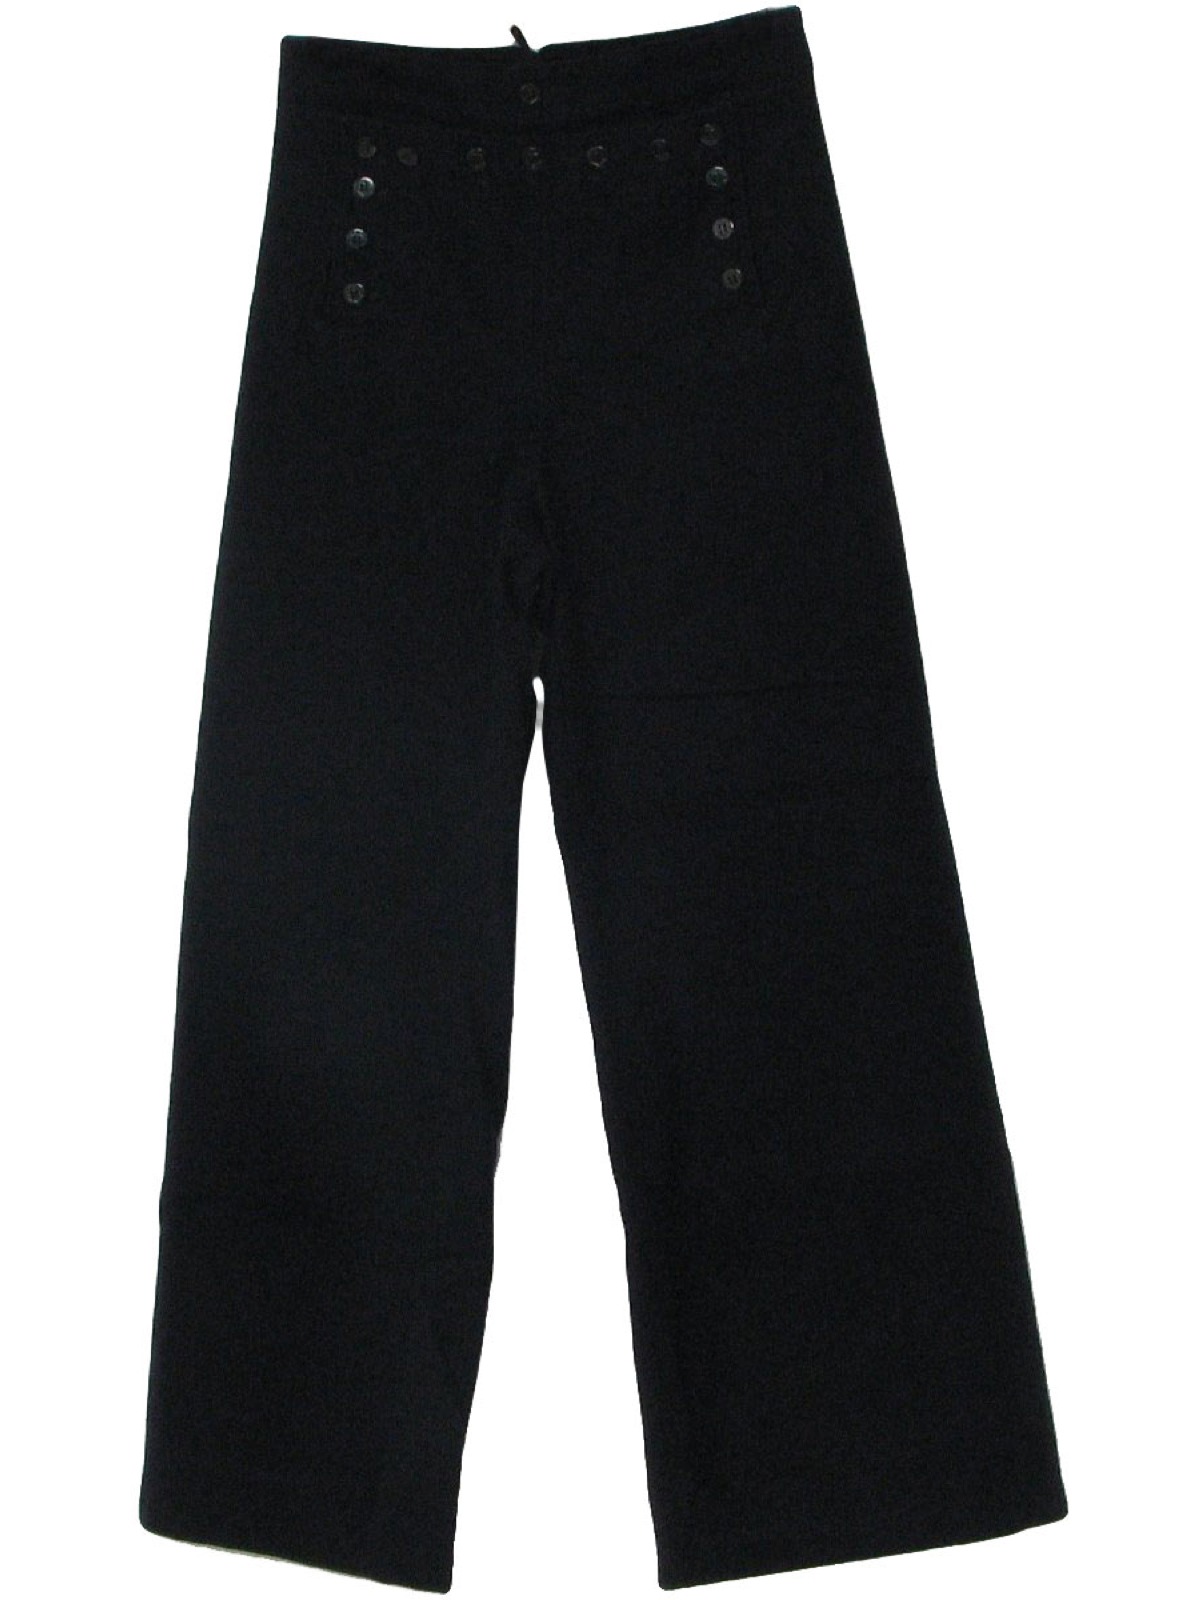 Navy Issue 60's Vintage Bellbottom Pants: 60s -Navy Issue- Mens ...